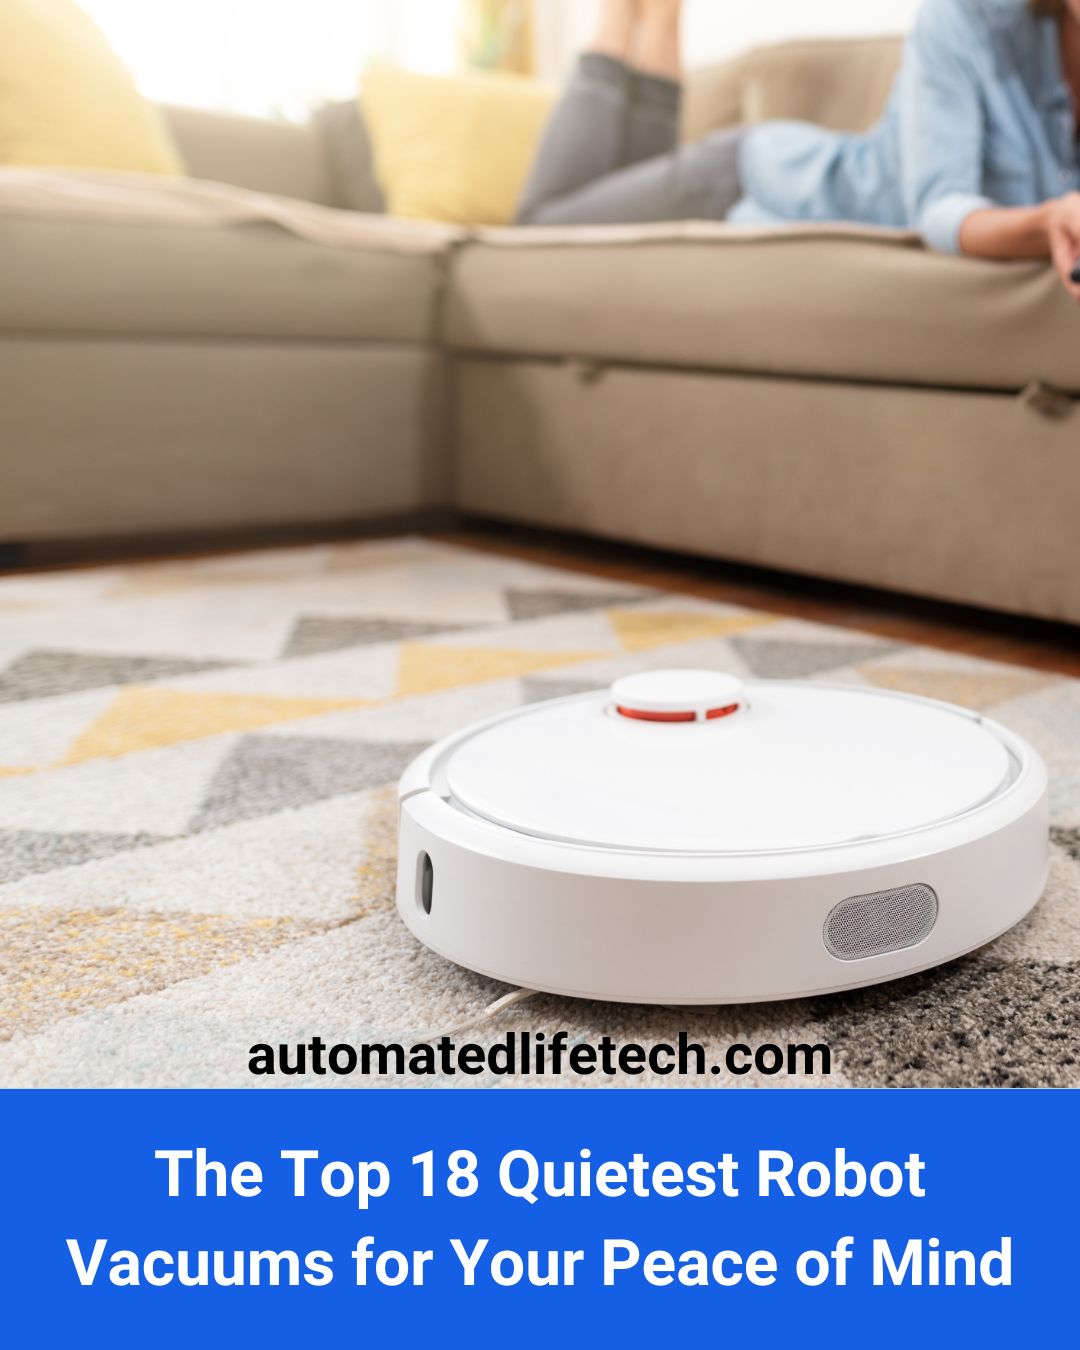 The Top 18 Quietest Robot Vacuums for Your Peace of Mind